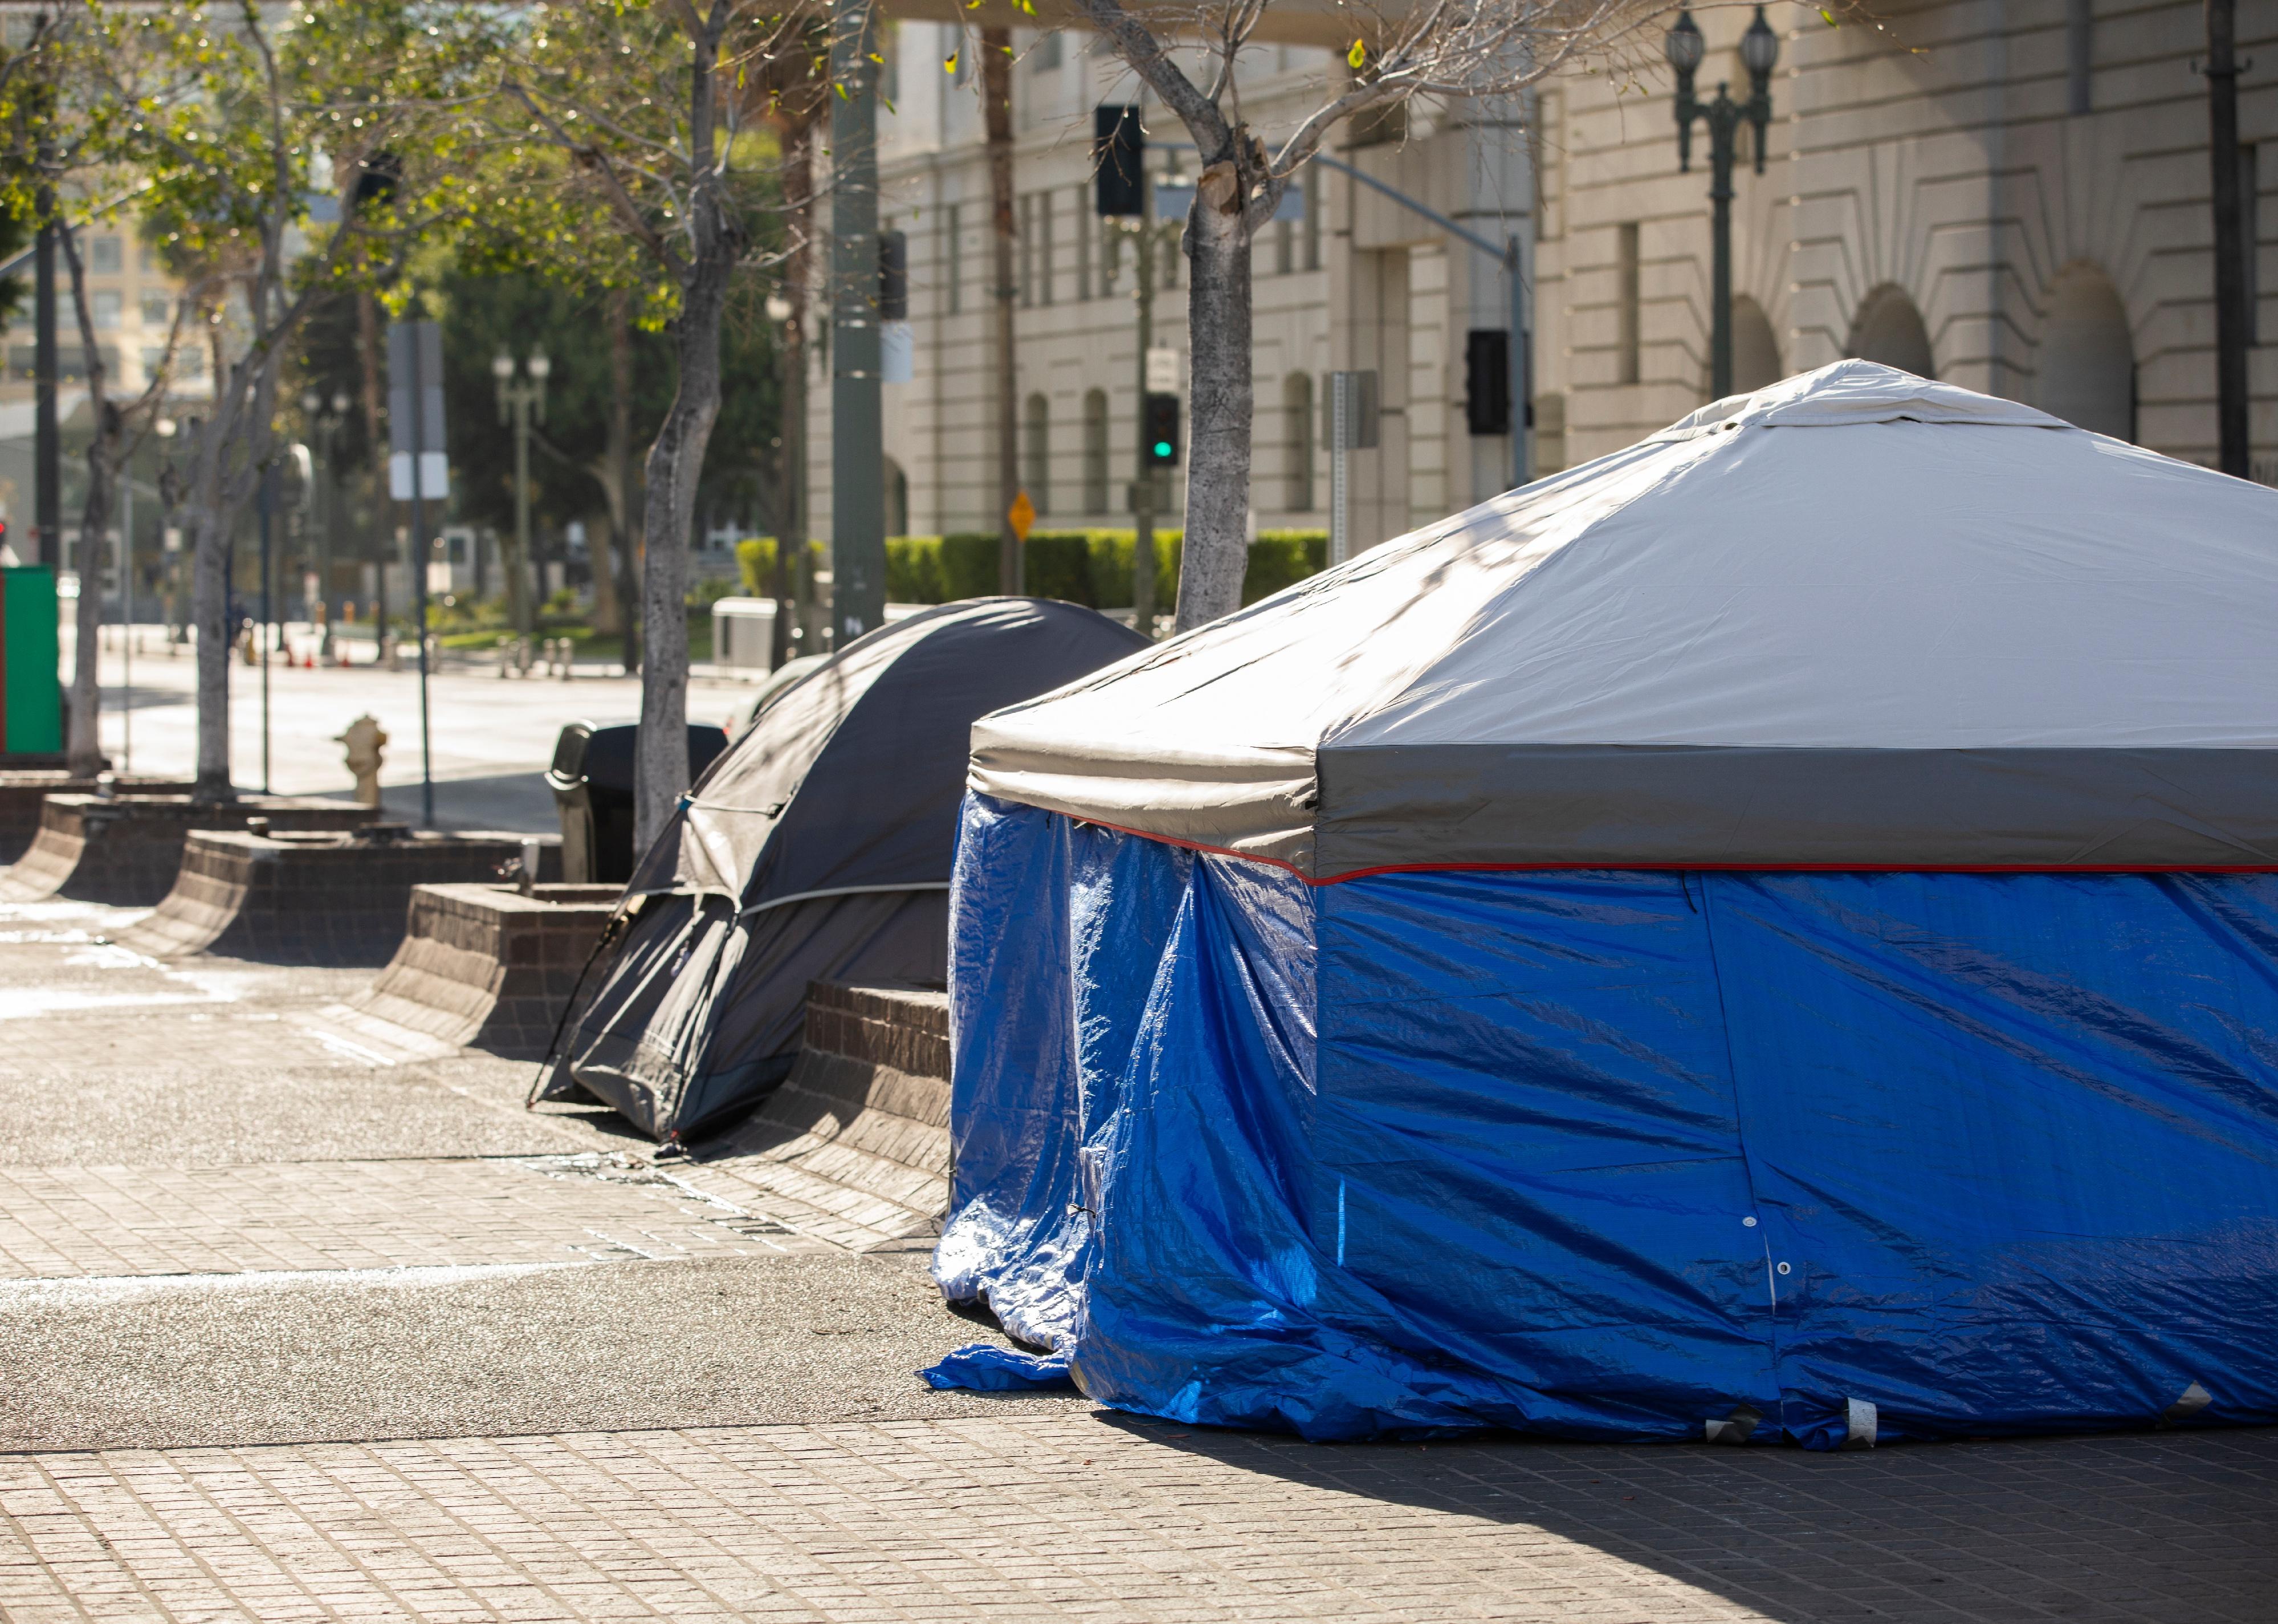 A homeless encampment sits on a street in Downtown Los Angeles.